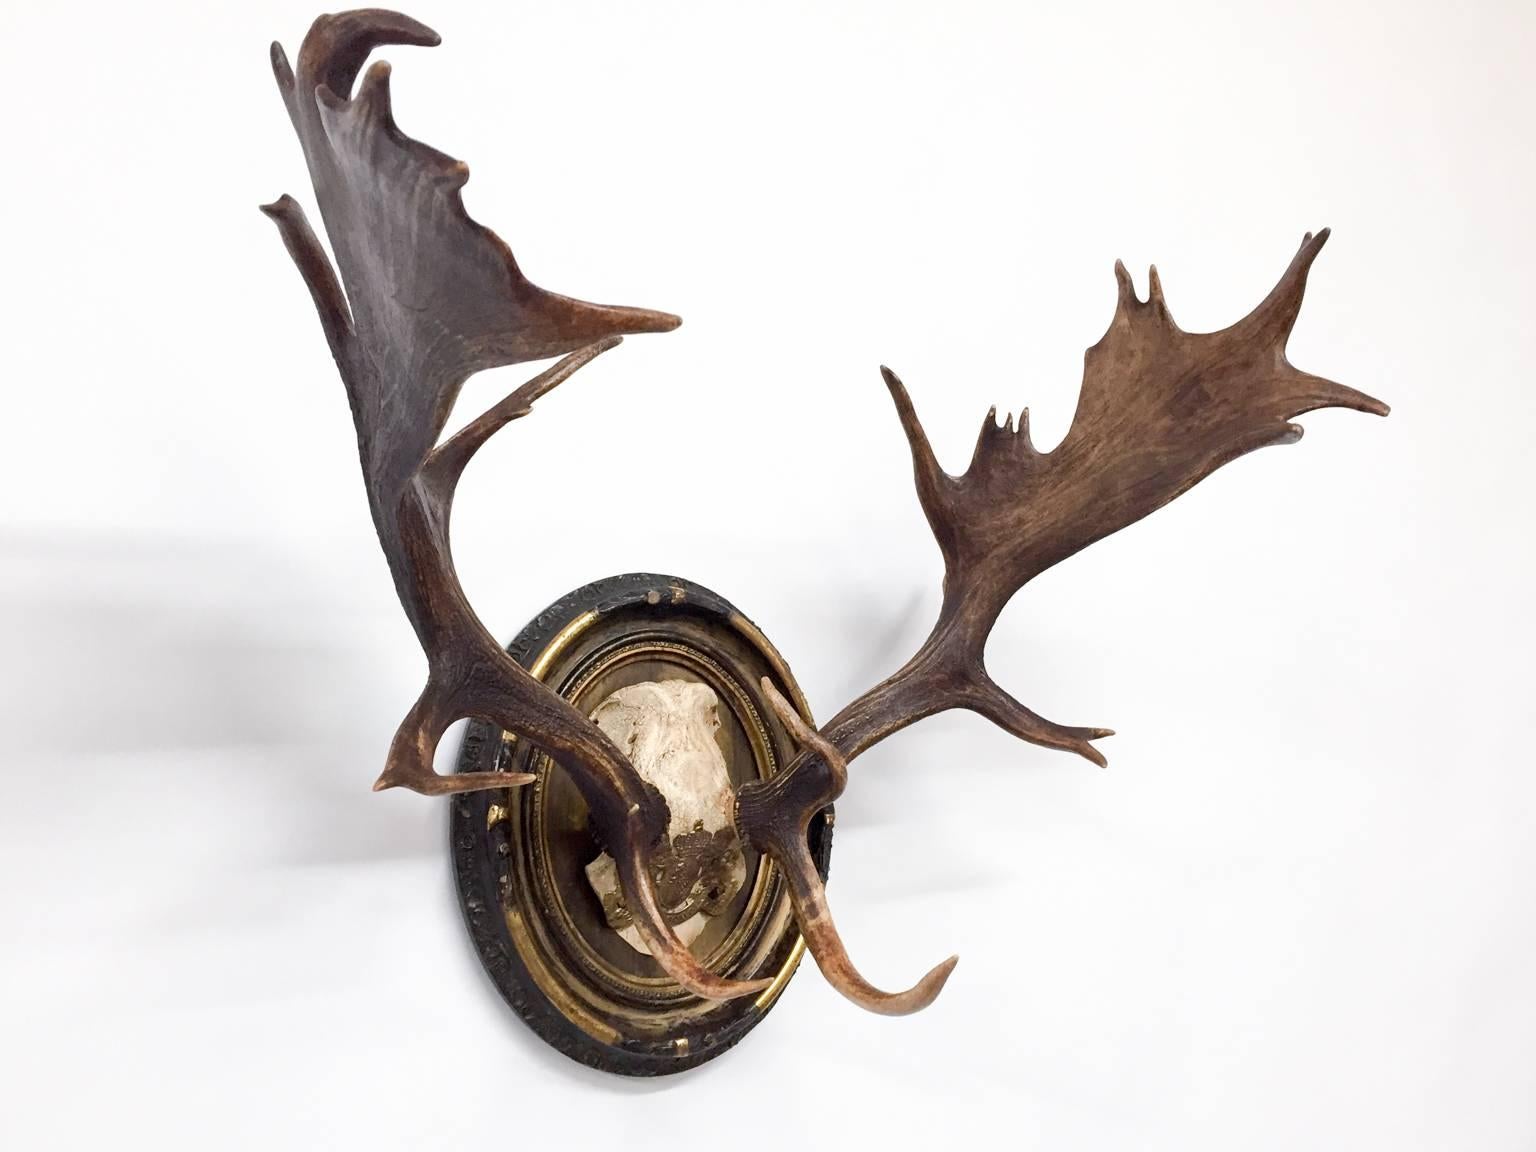 19th century Fallow Deer trophy from Emperor Franz Joseph's castle at Eckartsau in the Southern Austrian Alps, a favorite hunting schloss of the Habsburg Royal family. This historic hunting trophy features an orginal period plaque and original